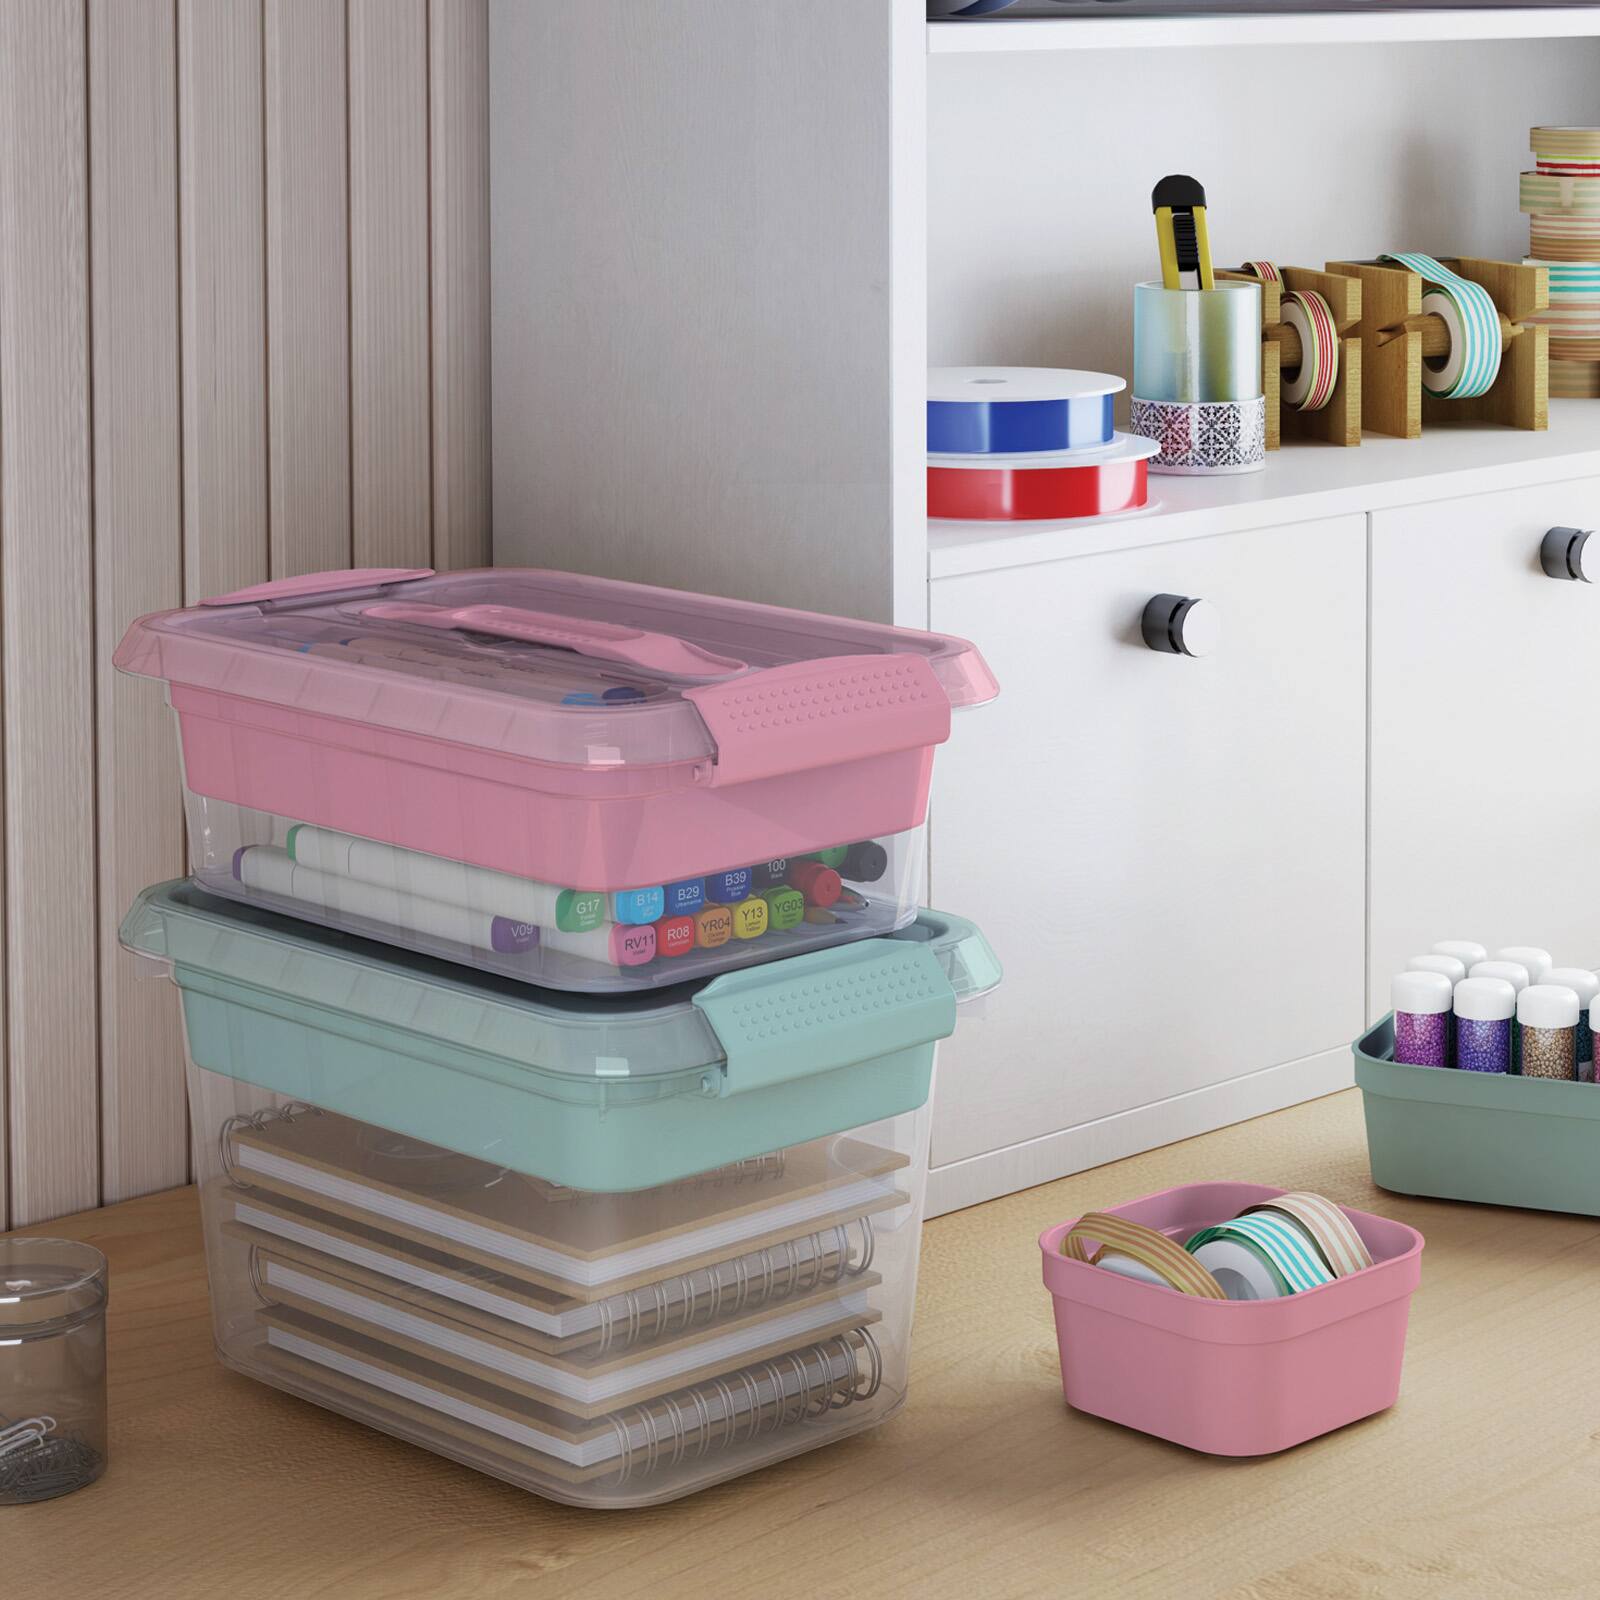 6 2qt Latchmate Mint Storage Box With Tray By Recollections